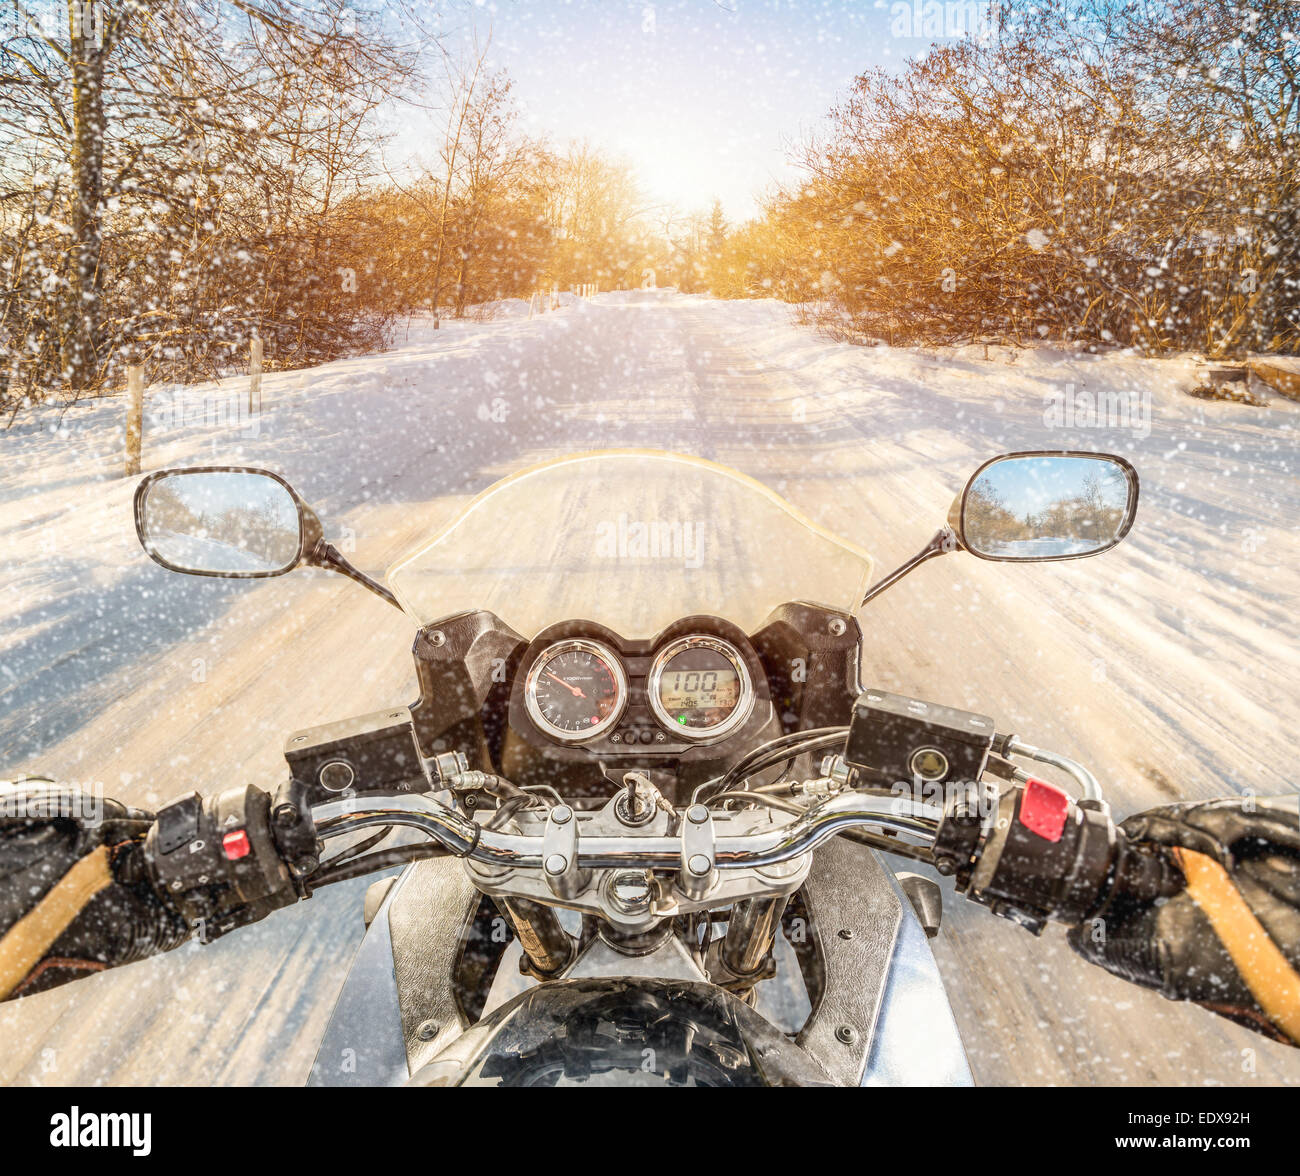 Biker rides on winter slippery road. First-person view. Stock Photo